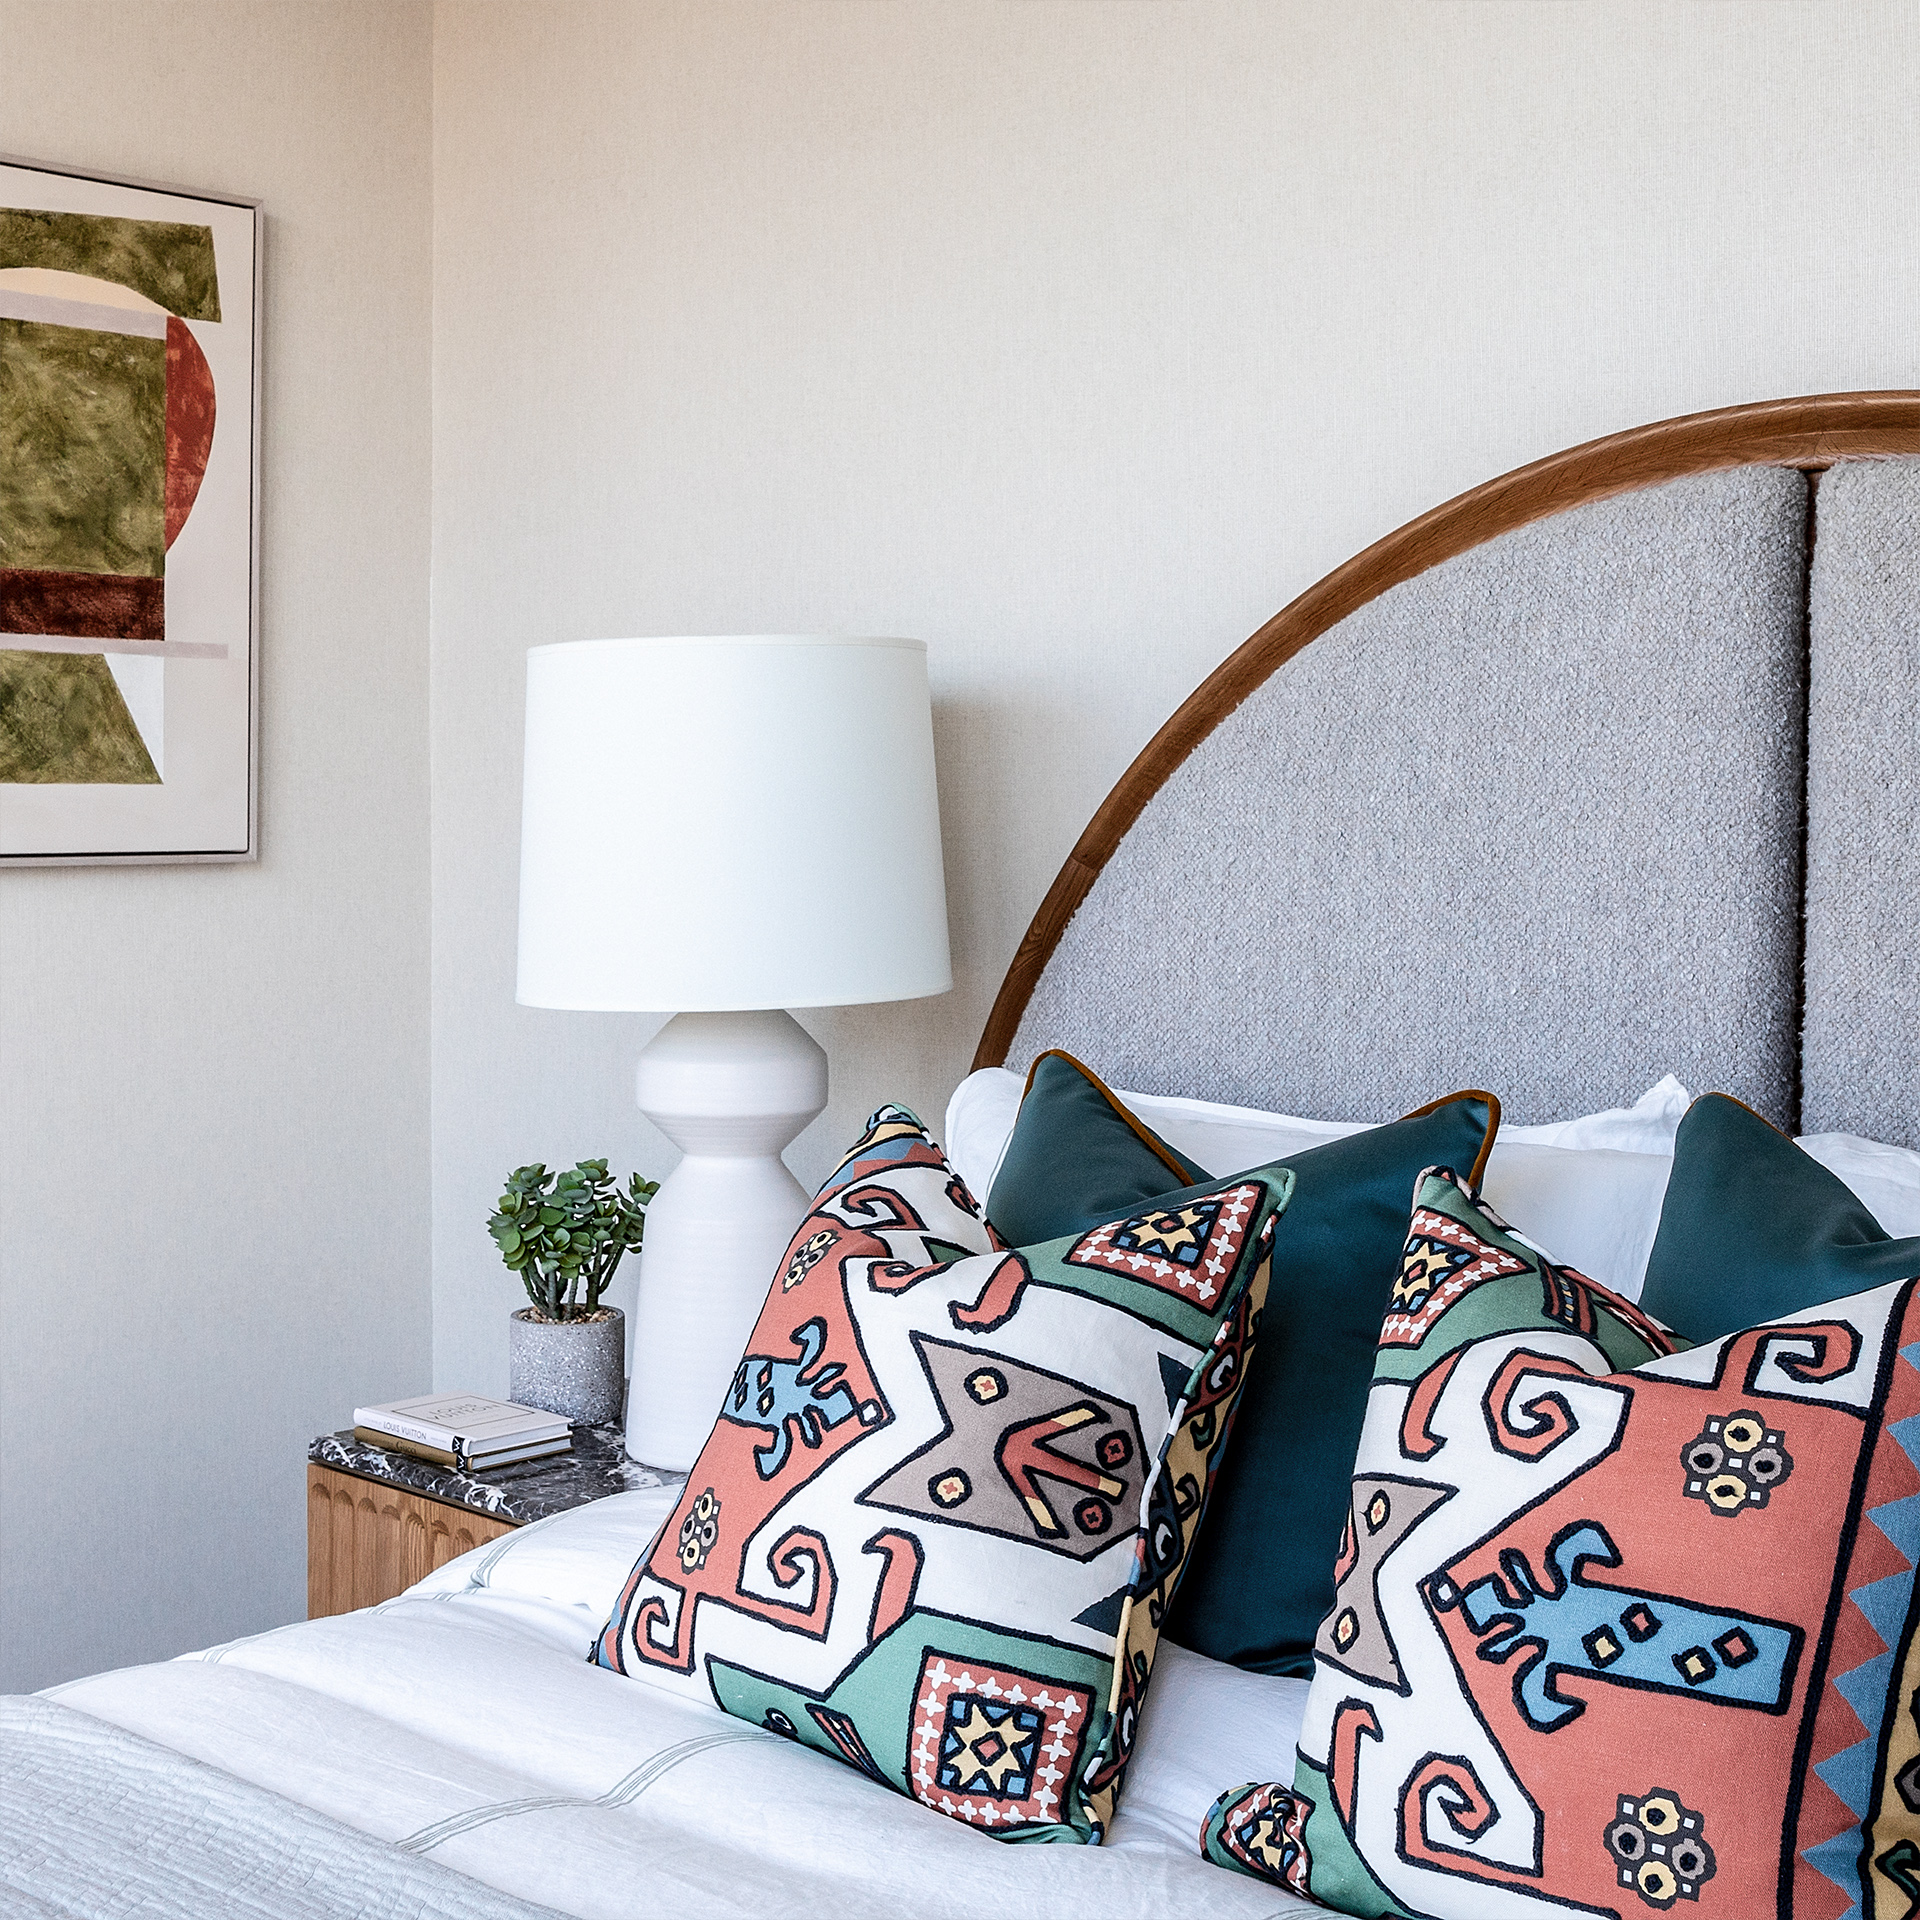 One St. John's Wood | Native cushions bring a splash of colour | Angel O'Donnell